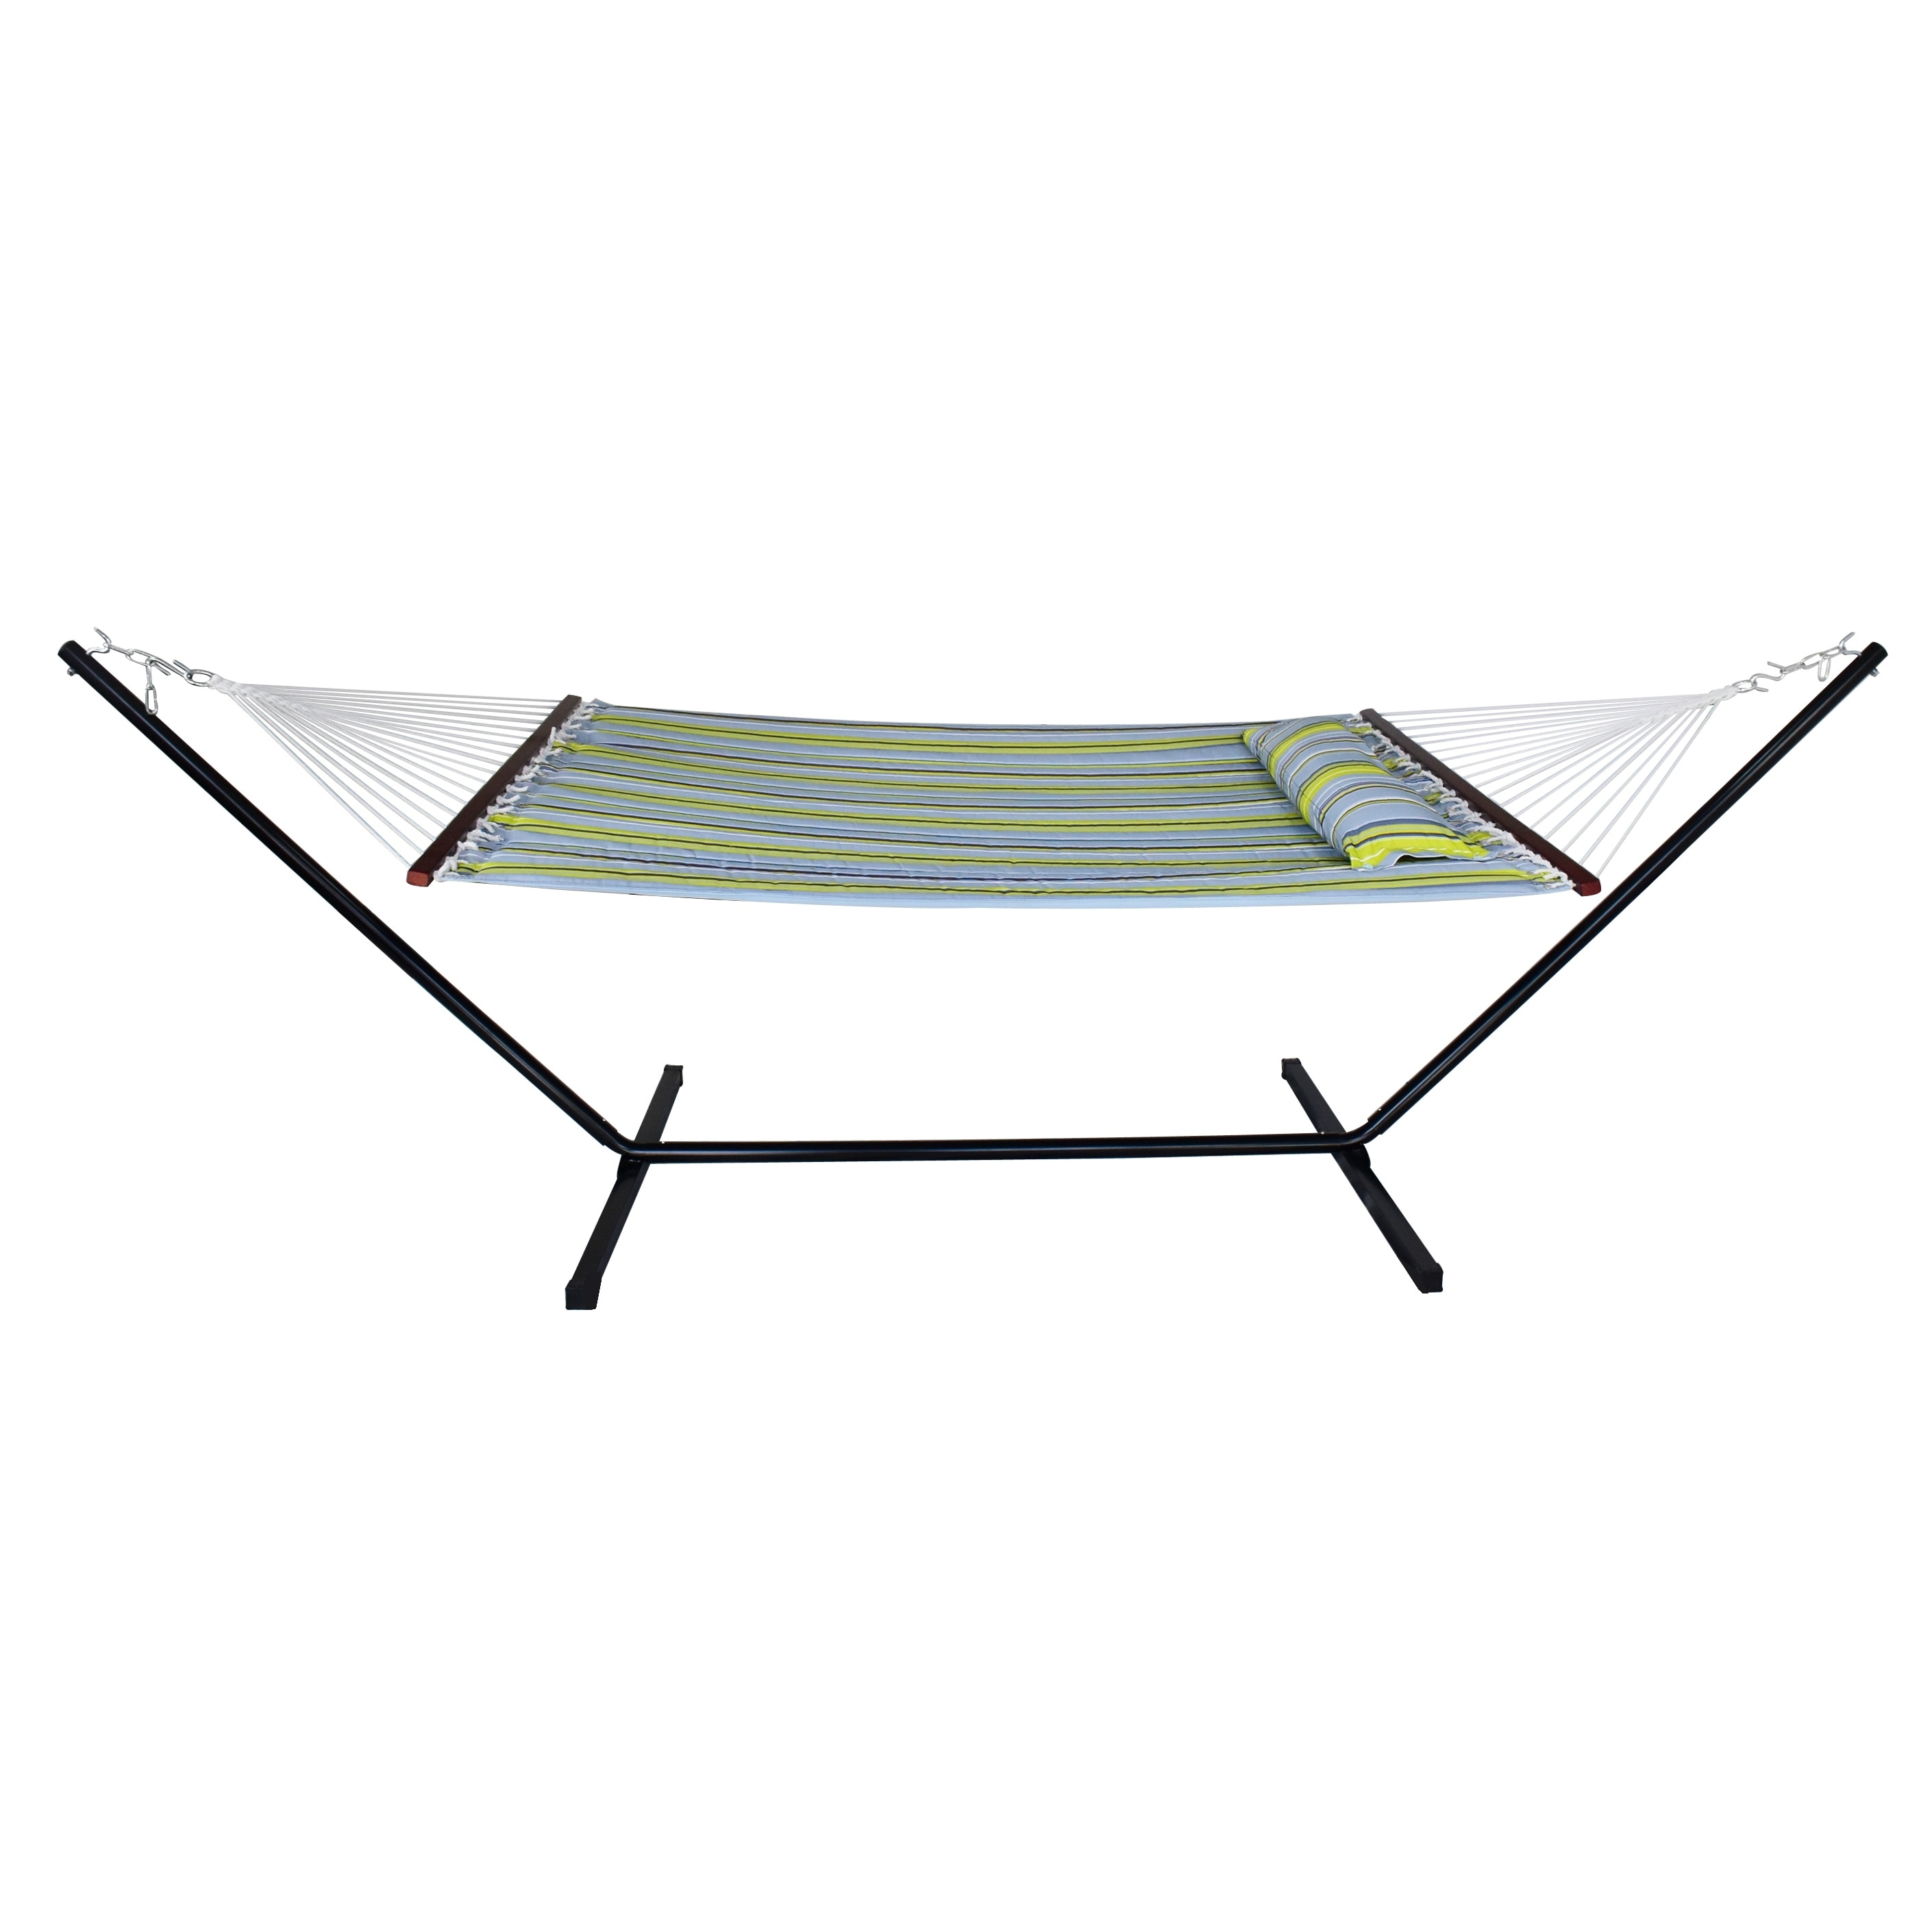 Hammock with Stand and Spreader Bars and Detachable Pillow, Heavy Duty, 450 Pound Capacity for Indoor/Outdoor (Green/Blue)